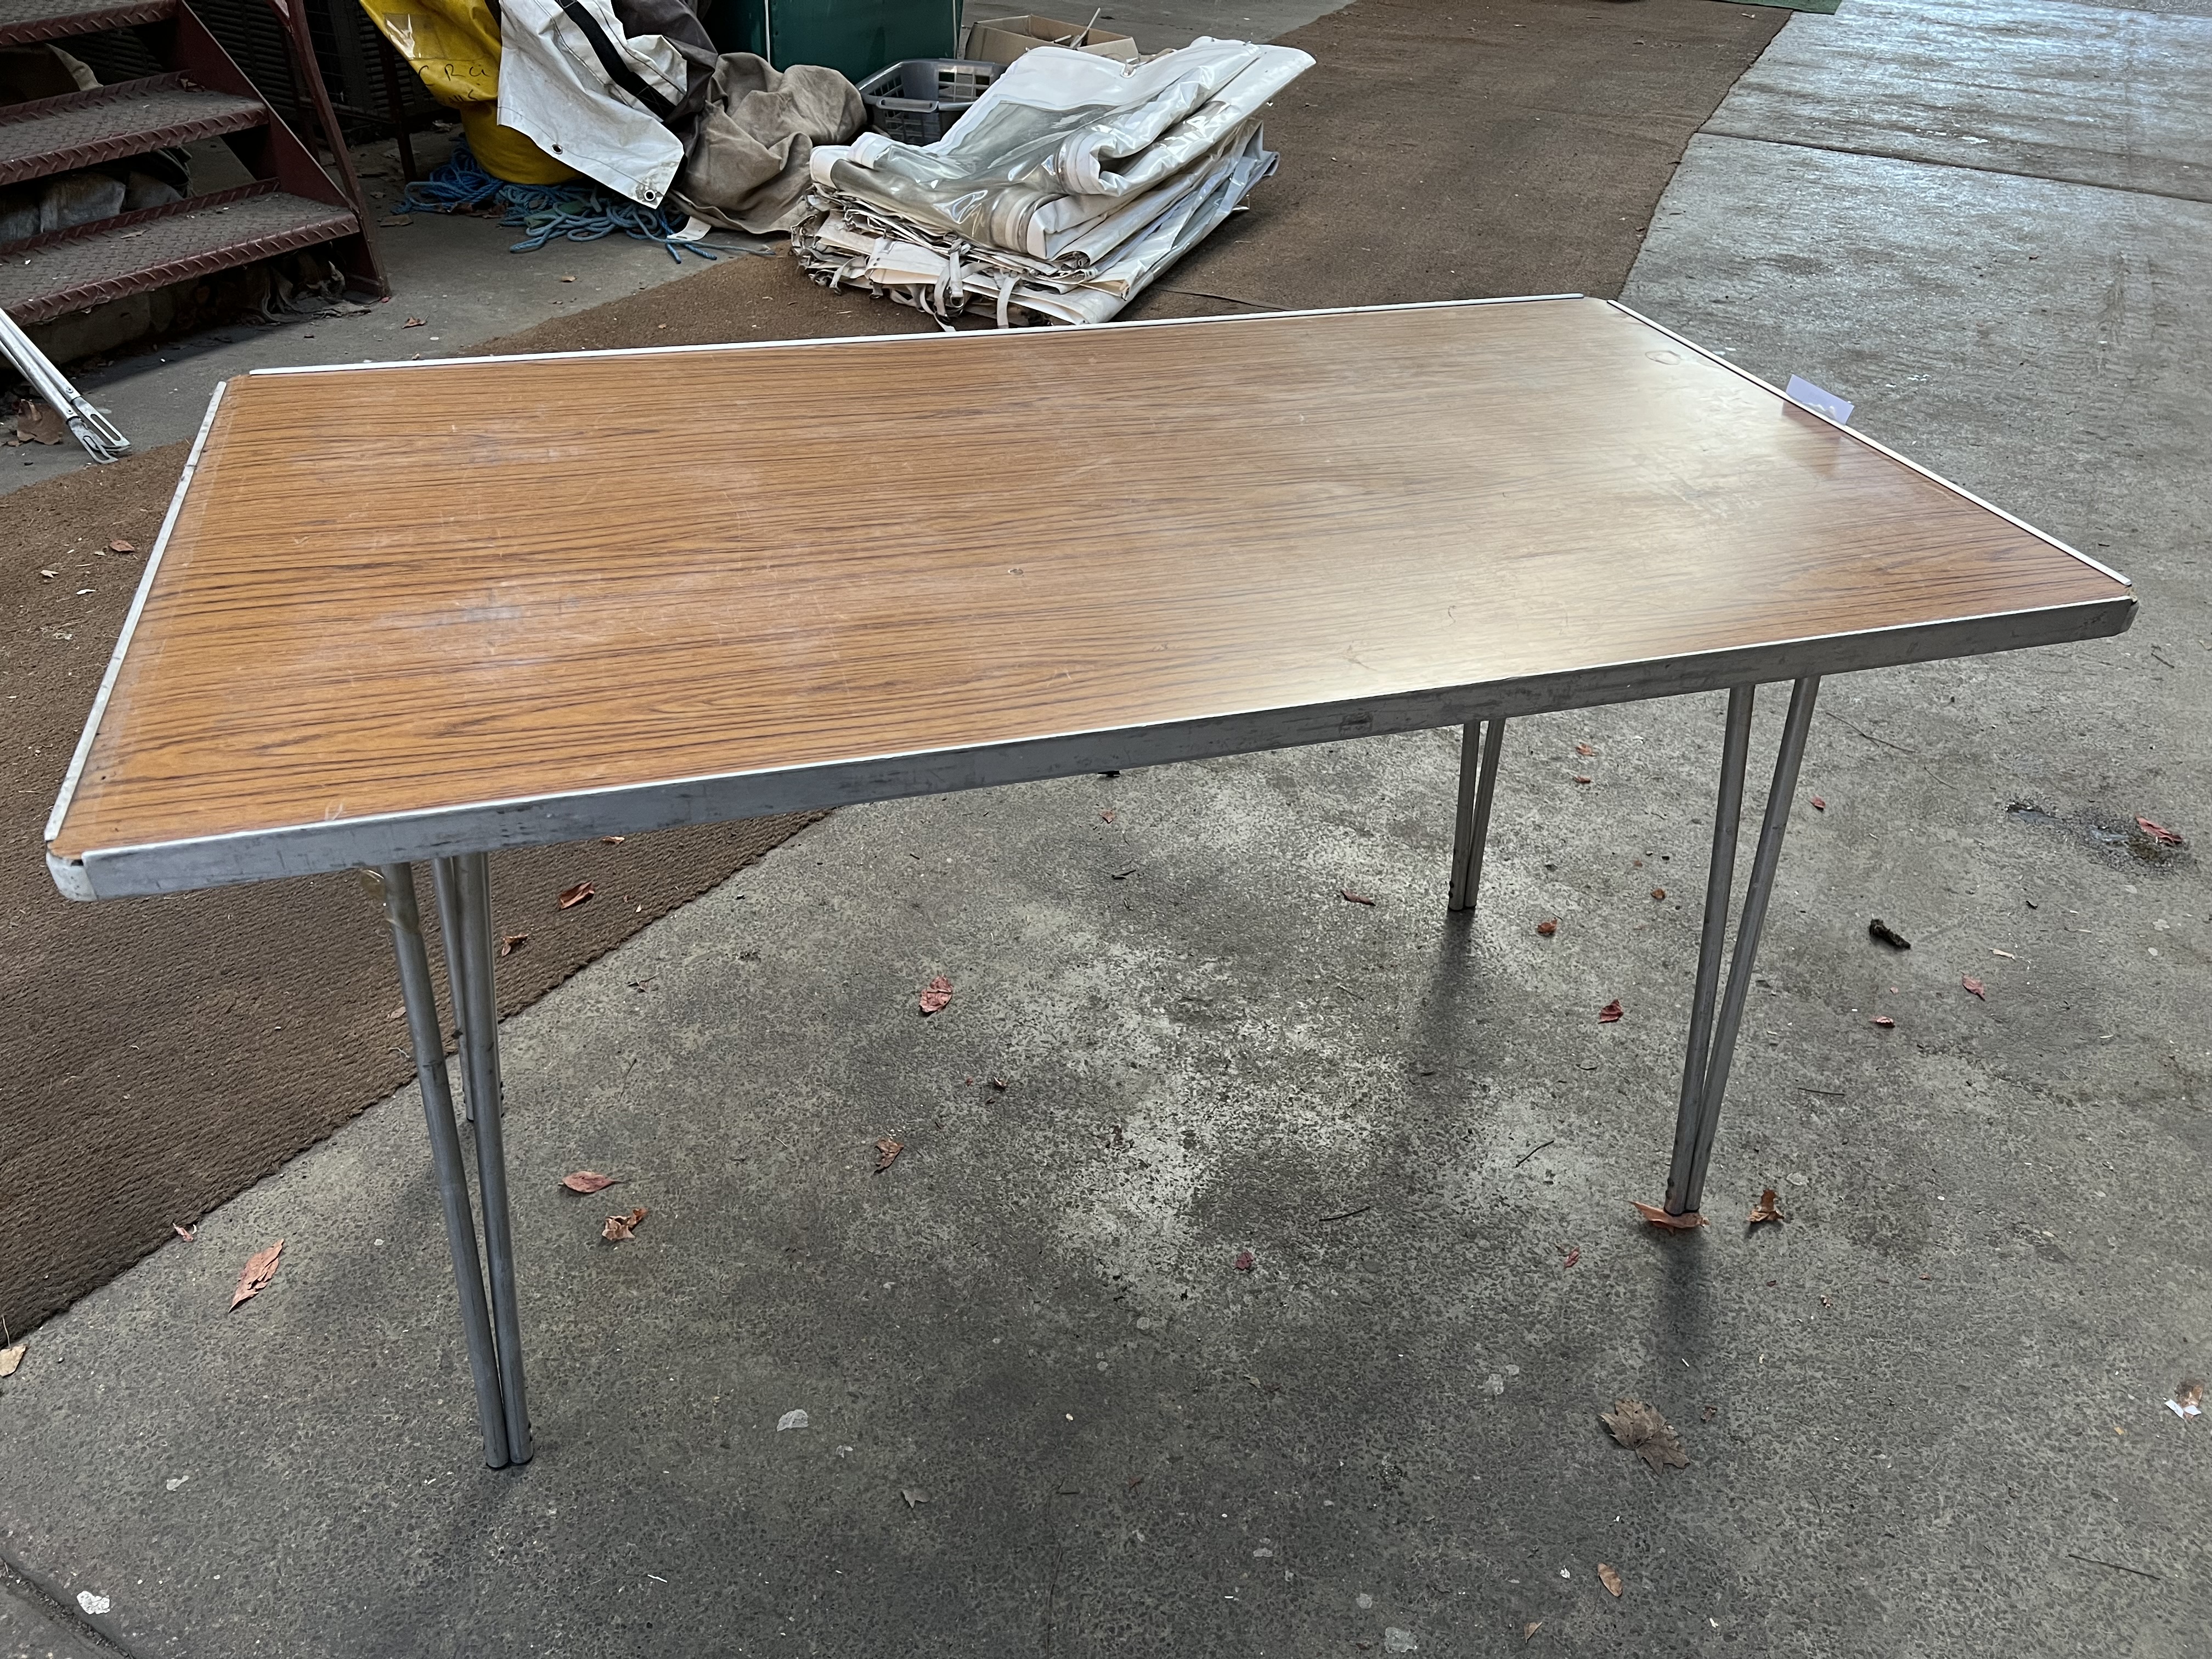 10 Gopak 4ft 6in trestle tables with folding legs and melamine top. This lot is subject to VAT.